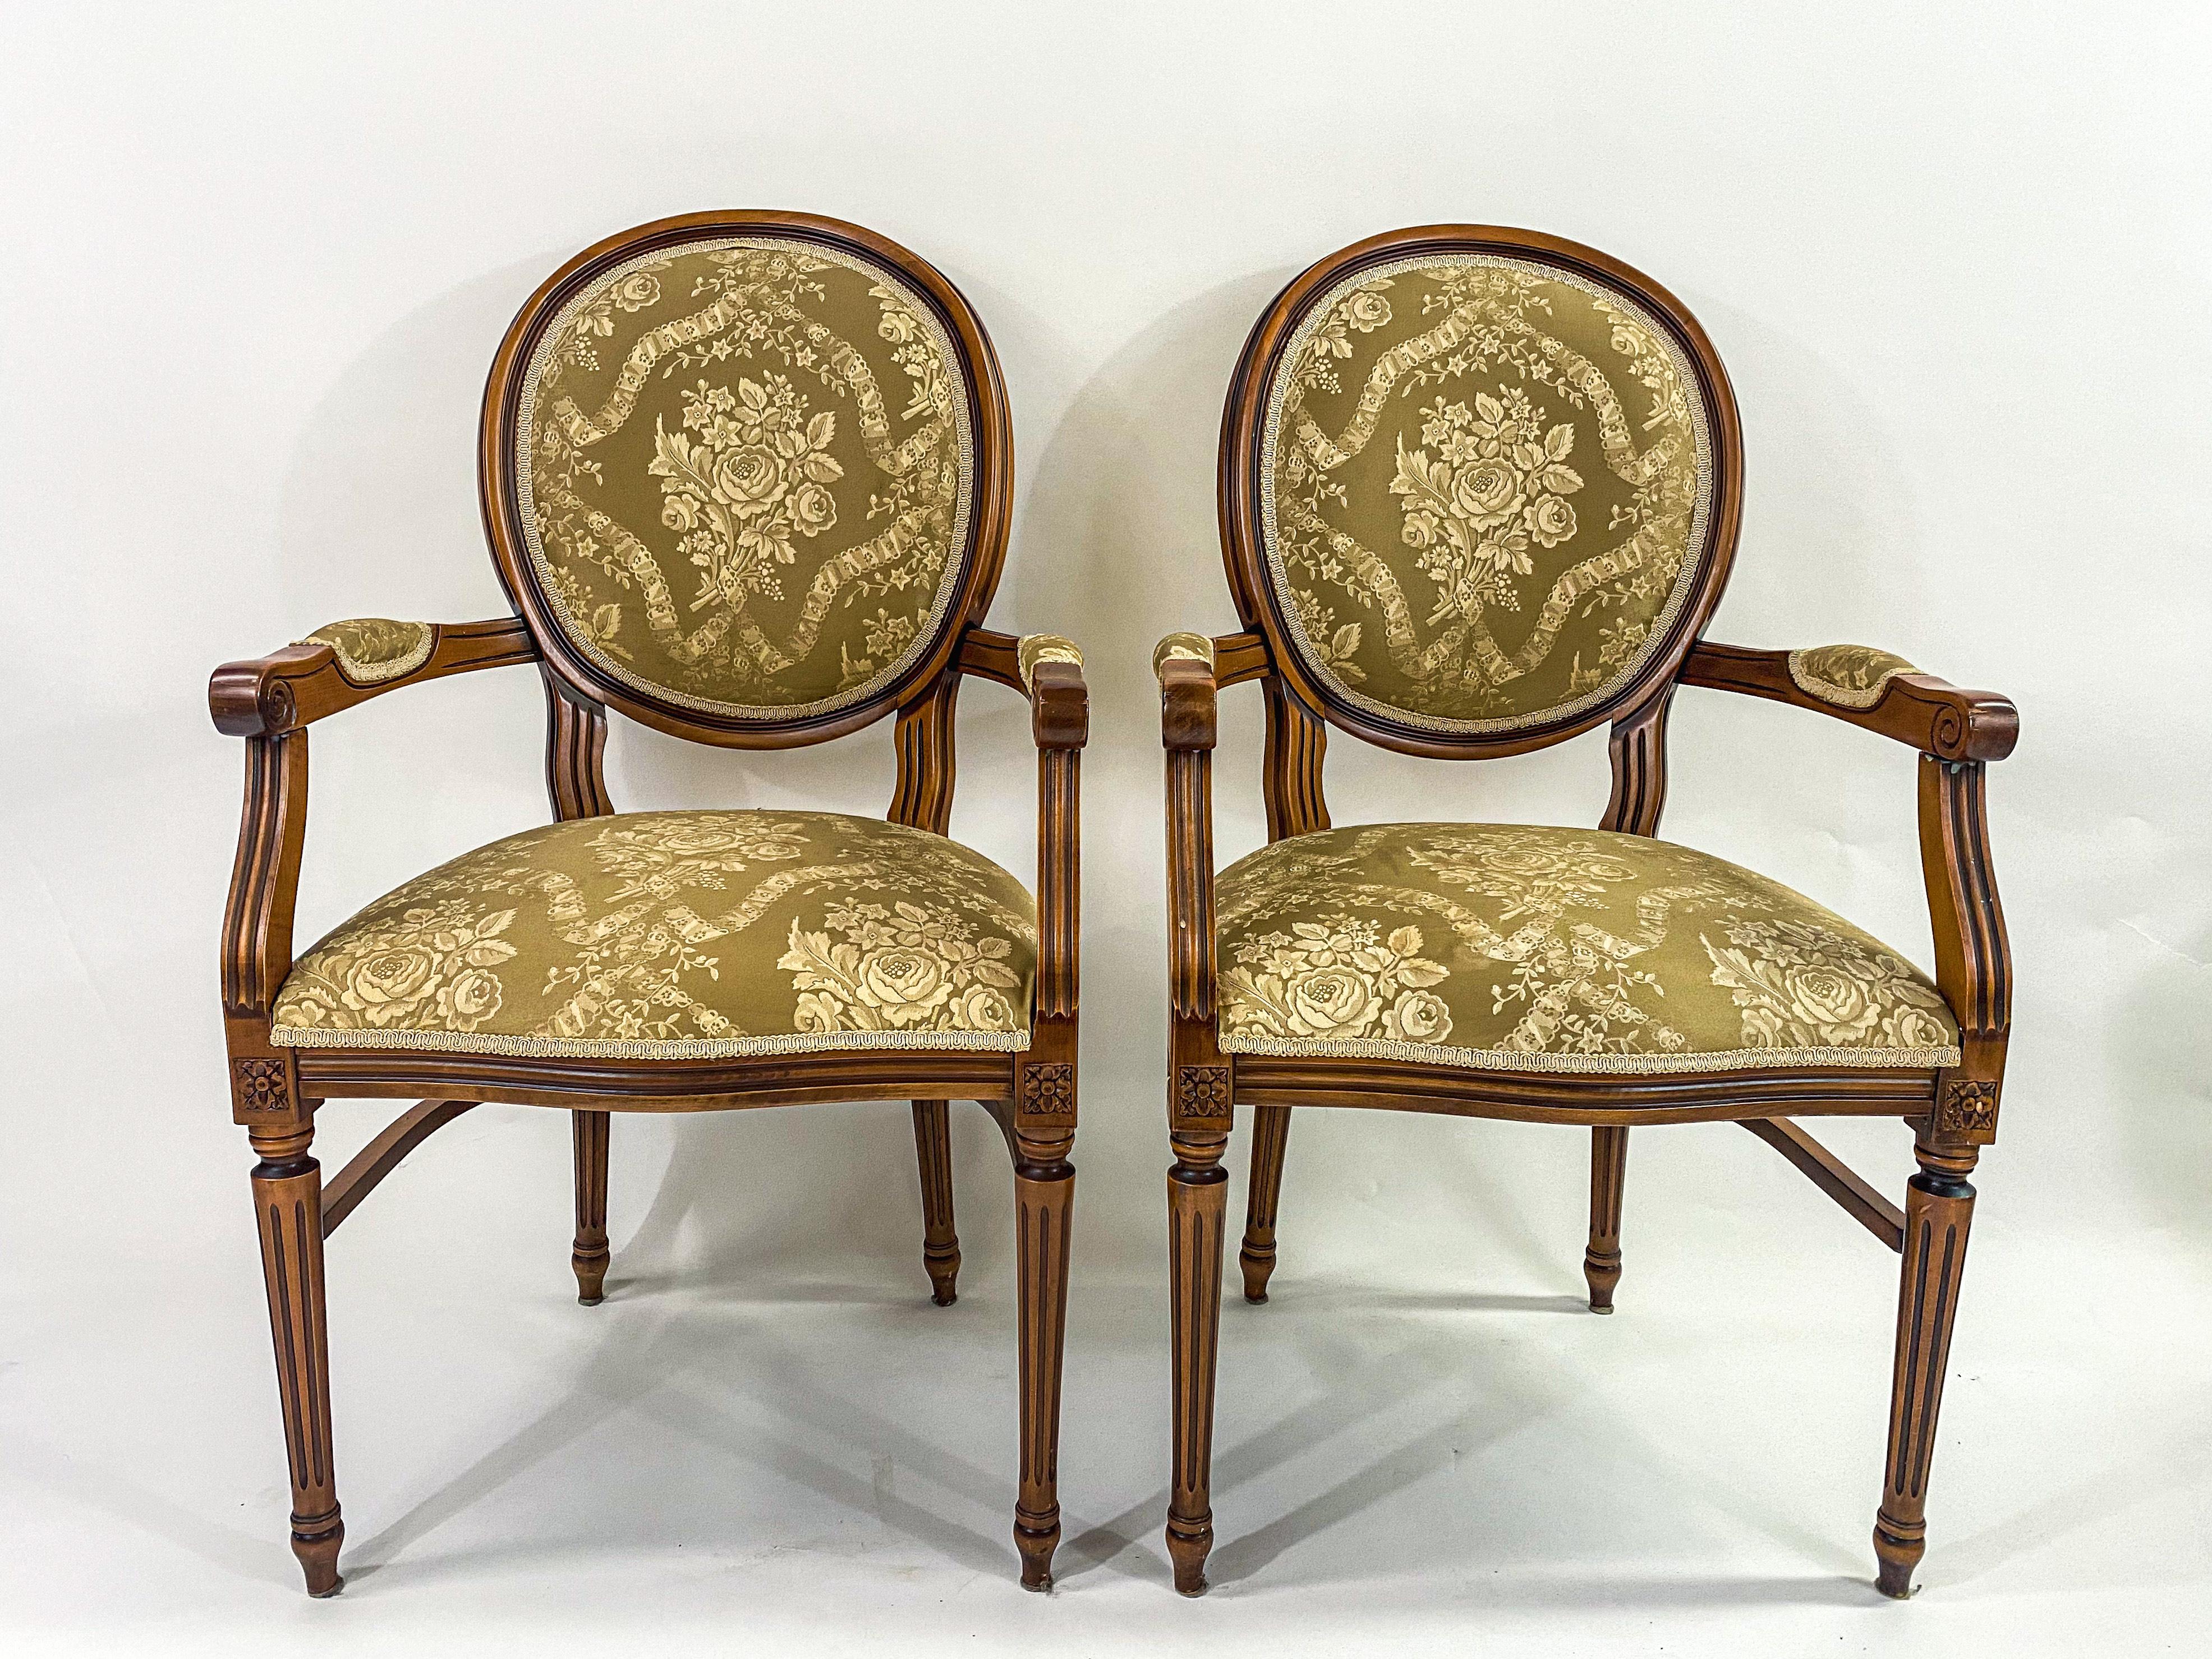 An elegant pair of French Louis XVI bergere or arm chairs. The chairs feature quality upholstery in light green with a hint of gold and is embellished with beautiful floral. details. The frame of the chair is finely carved of maple wood . The